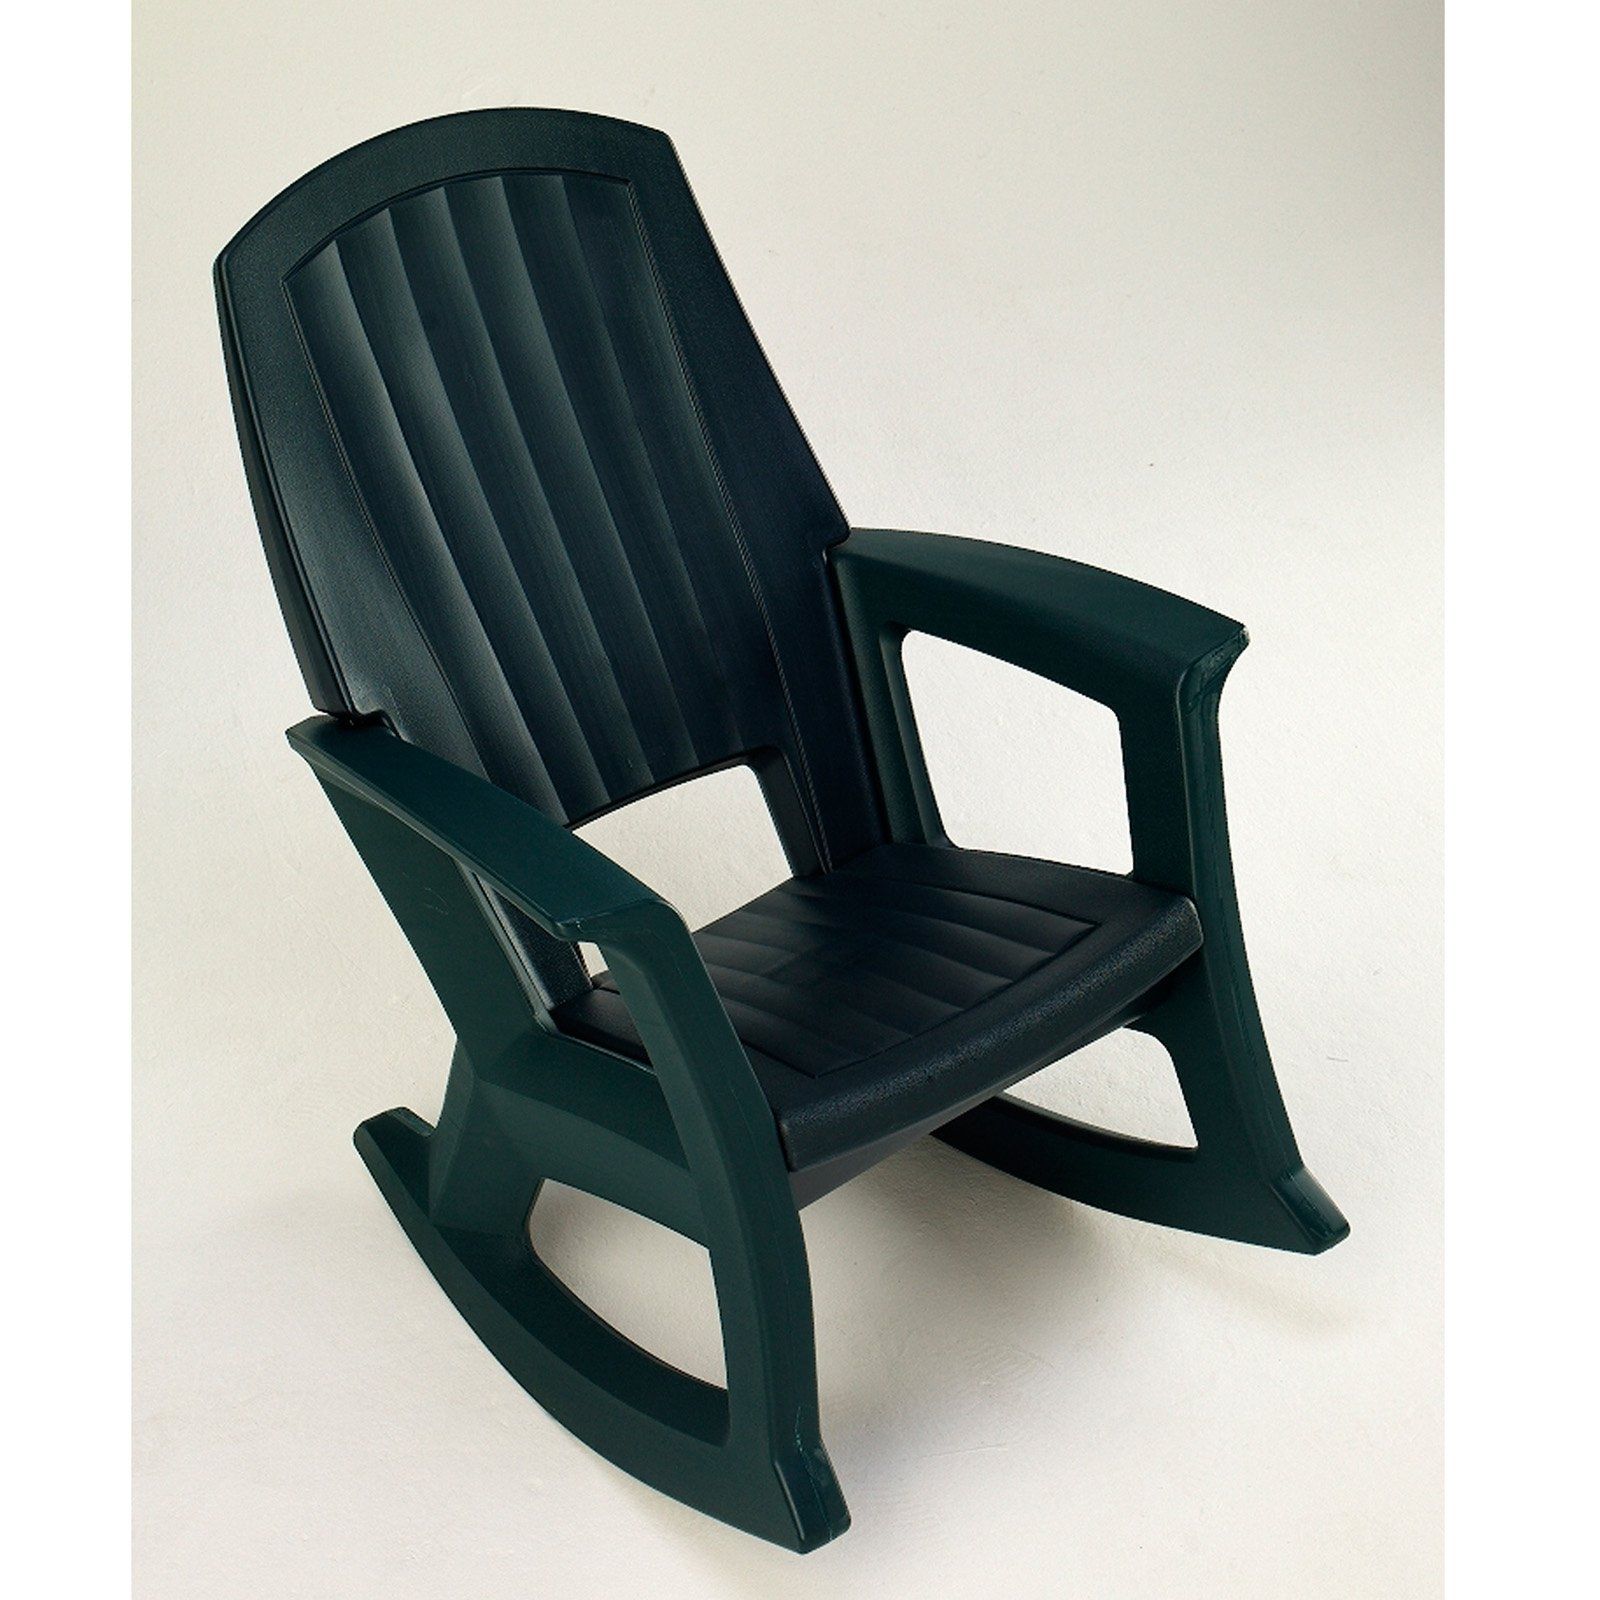 Small Patio Rocking Chairs Inside Popular Semco Recycled Plastic Rocking Chair – Walmart (Photo 13 of 15)